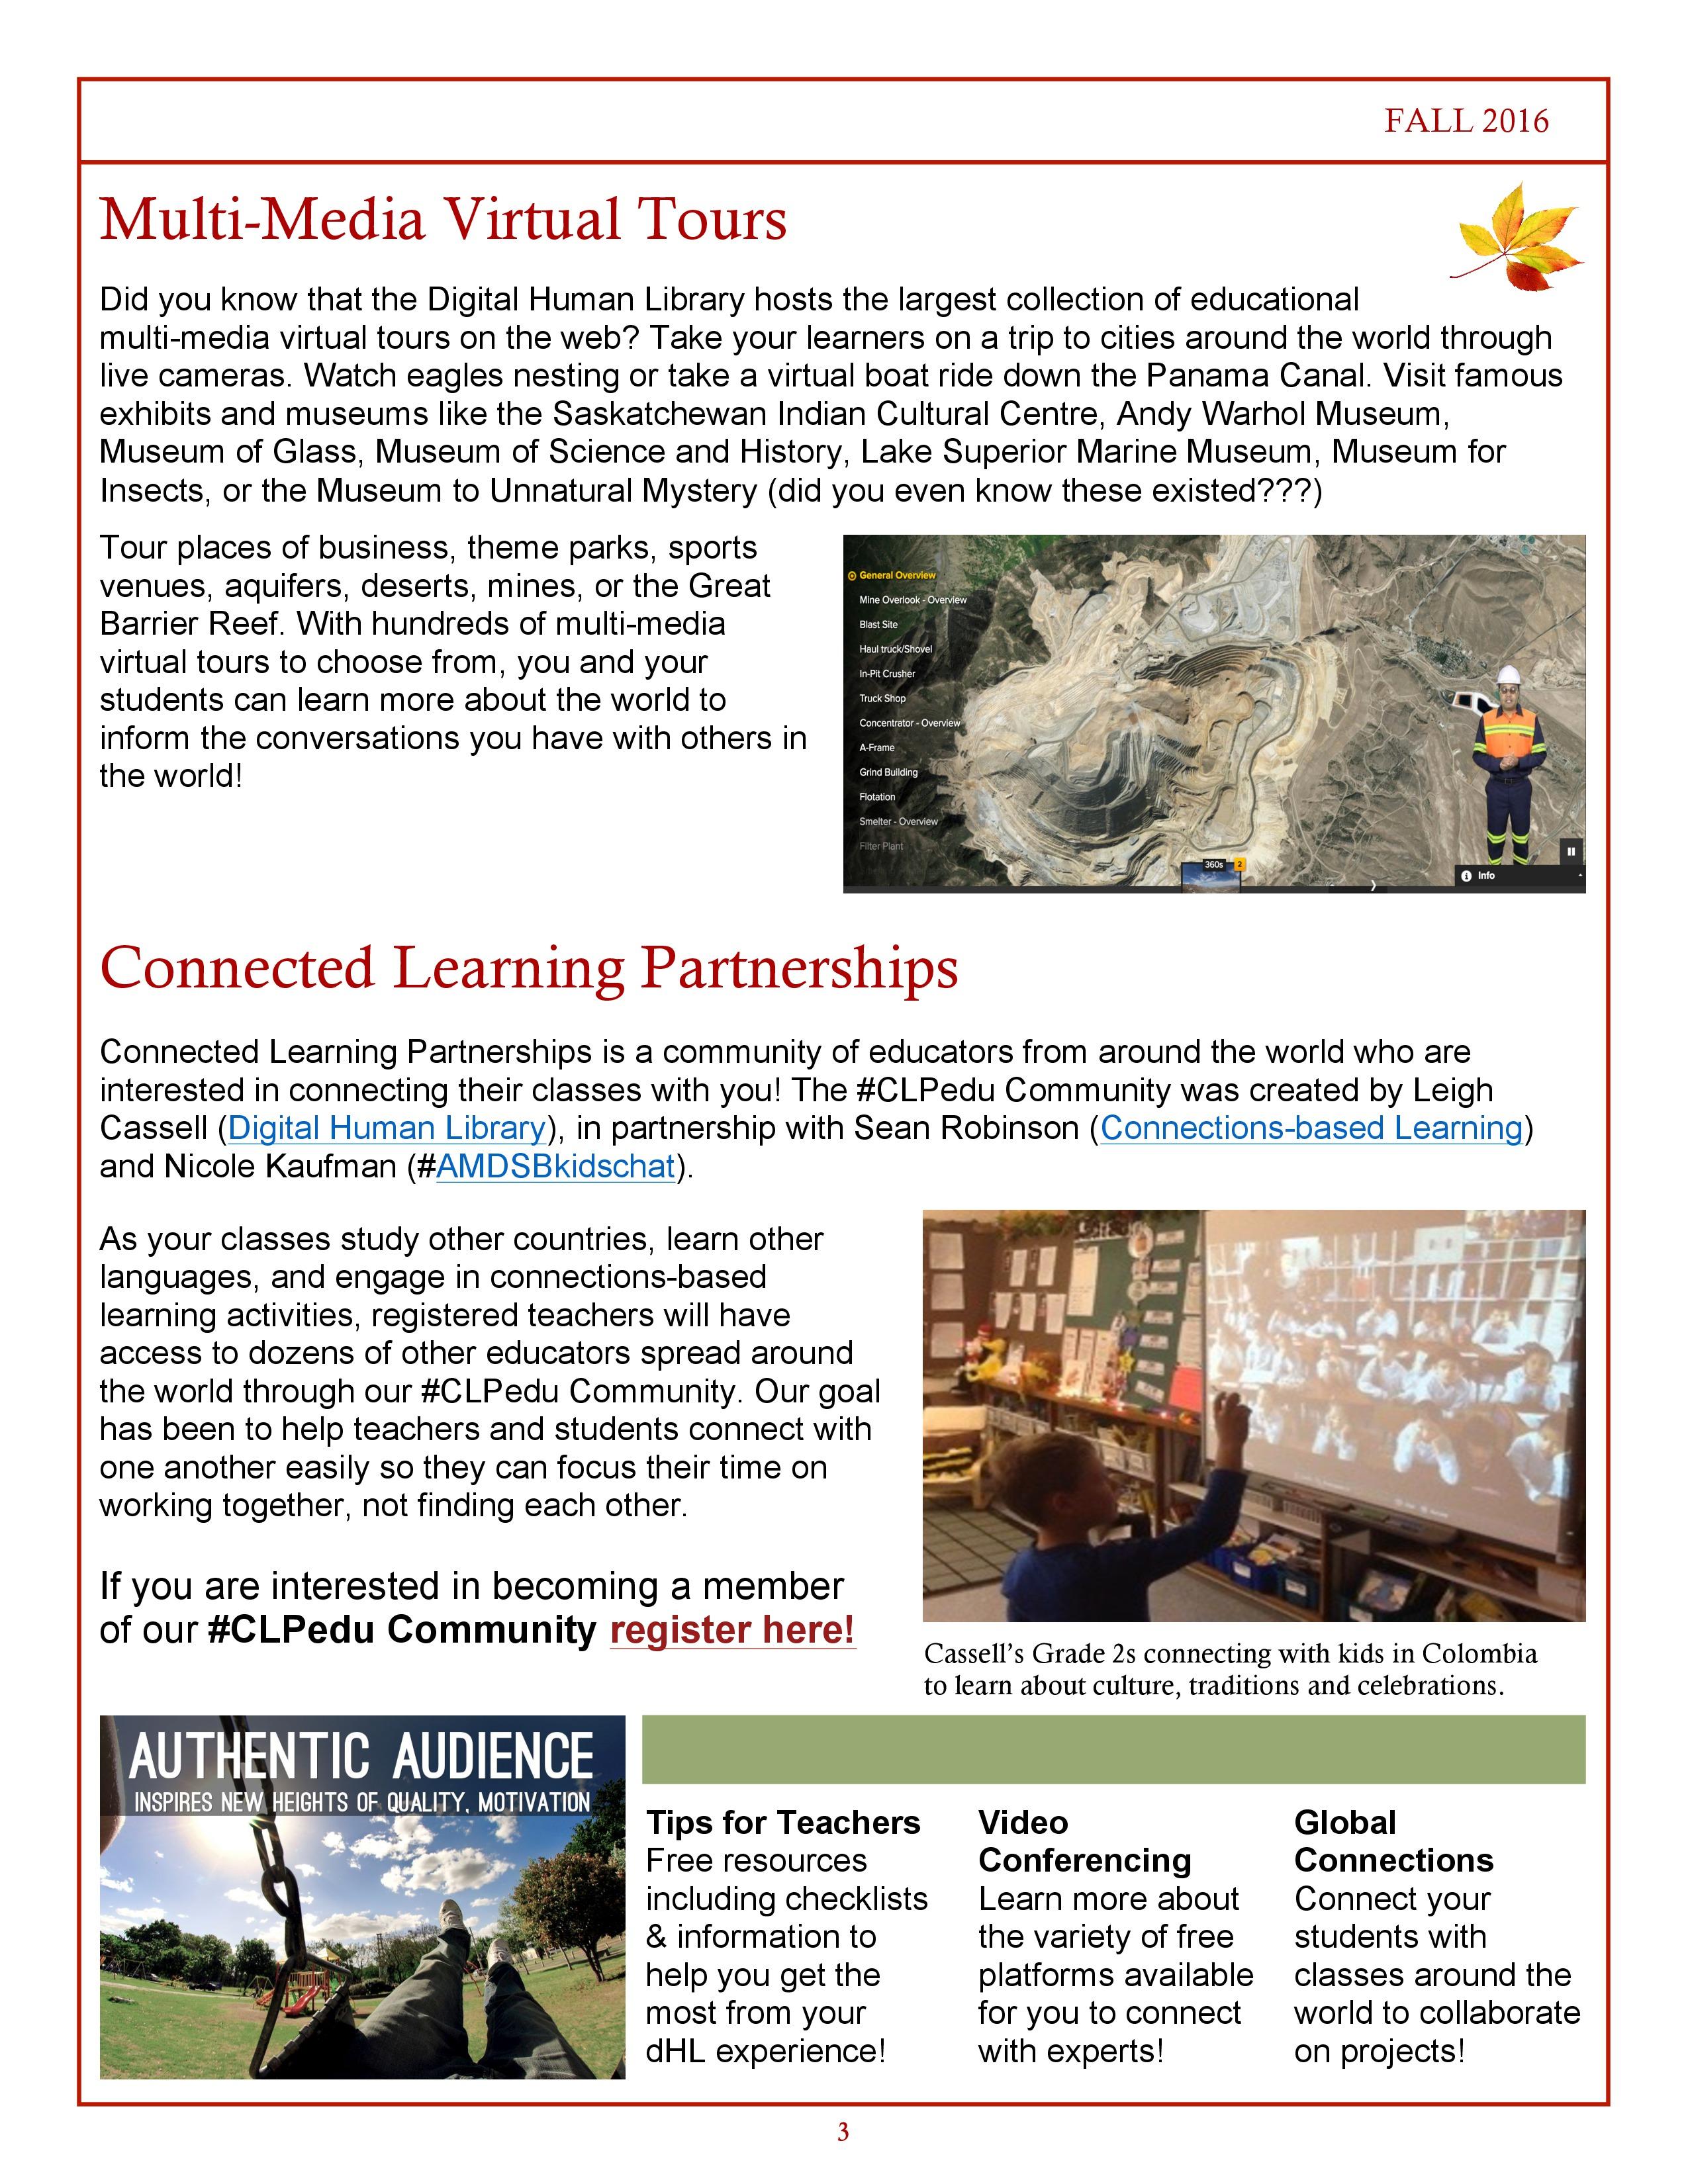 digital-human-library-september-newsletter_fall_2016-page-2-1